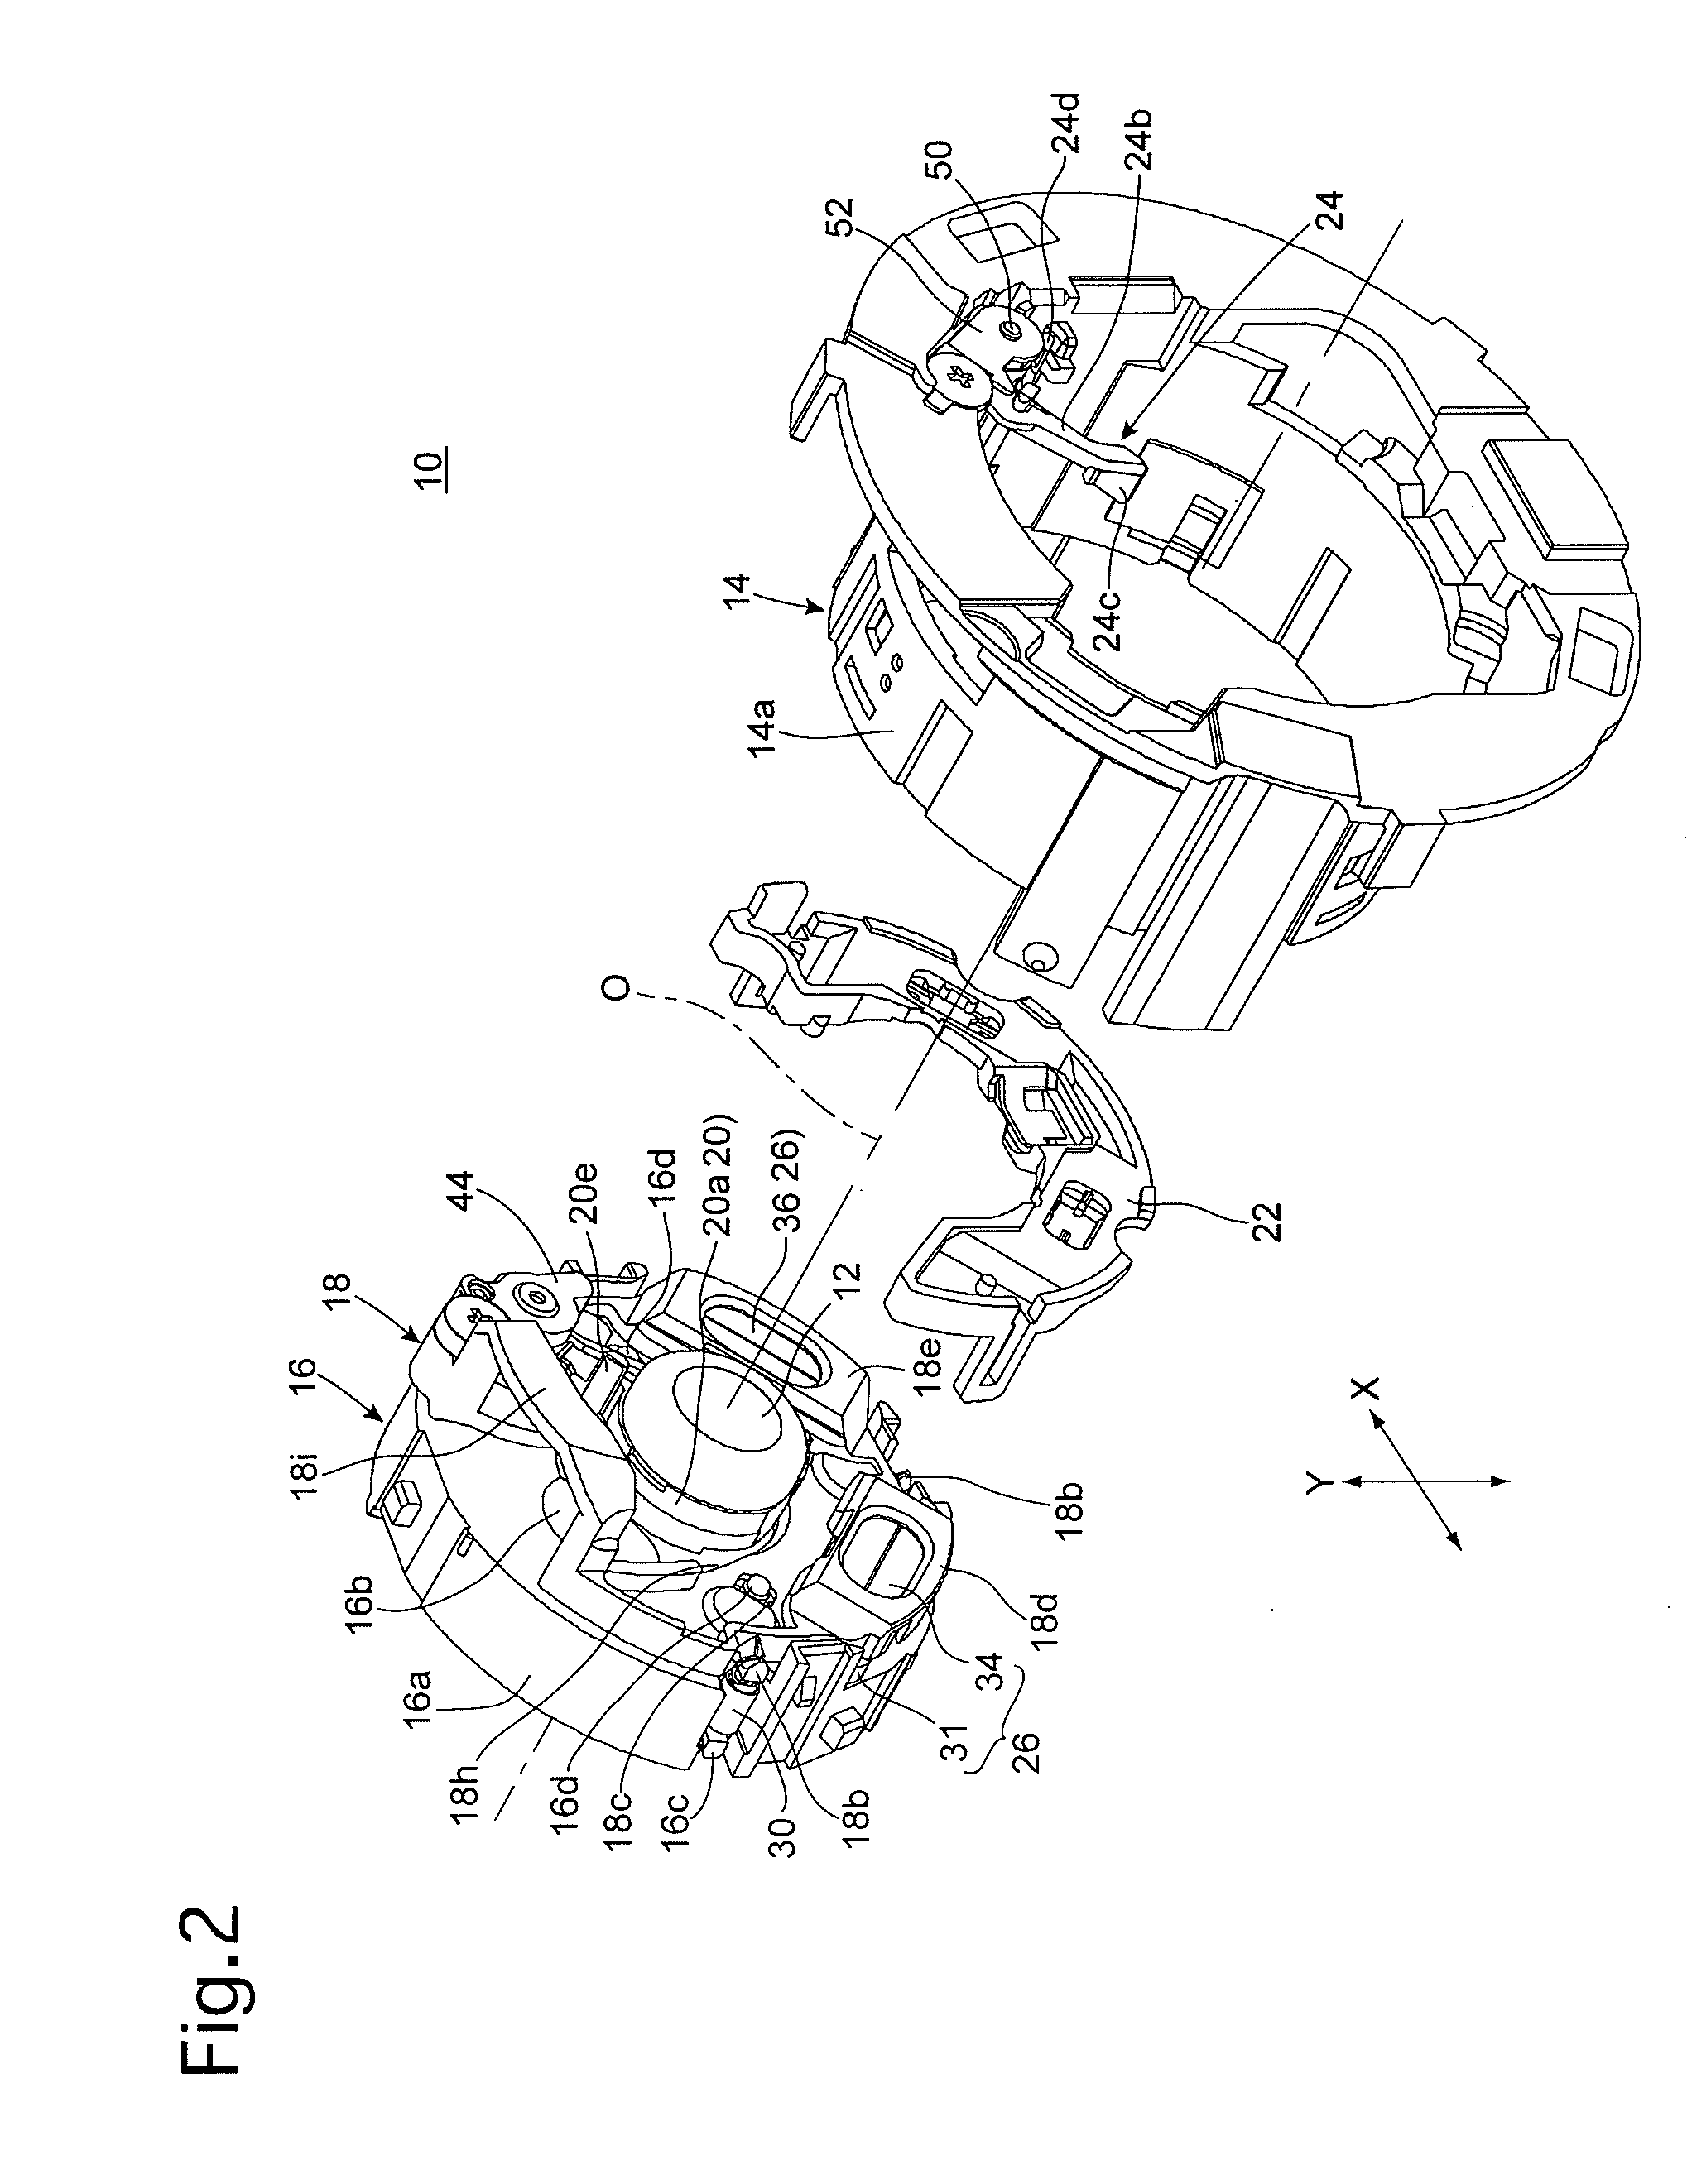 Position controller for removable optical element